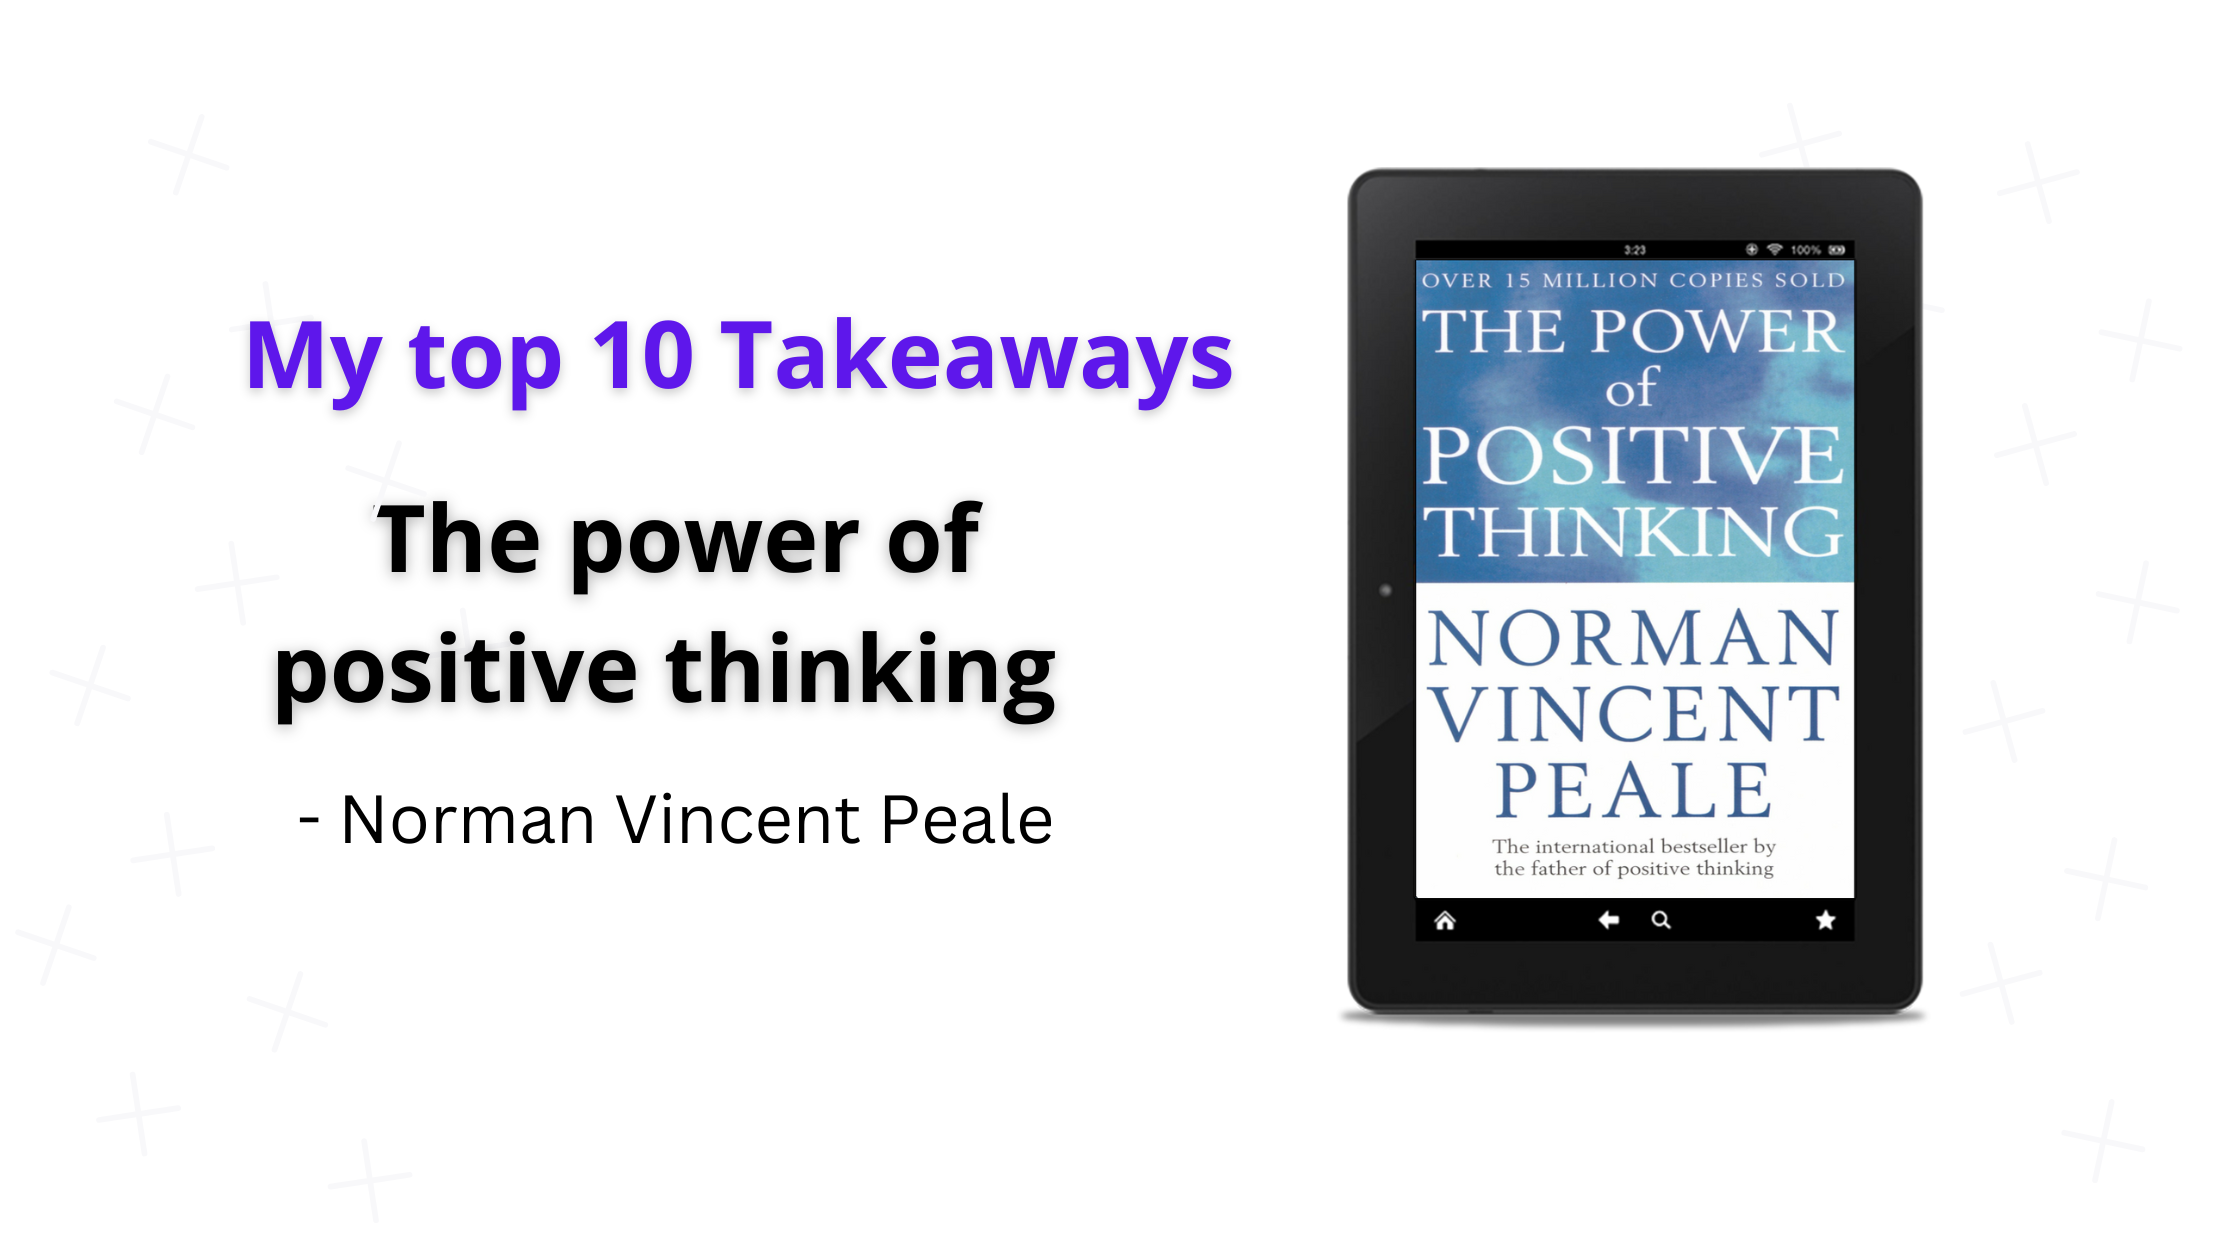 The power of positive thinking - My top 10 takeaways